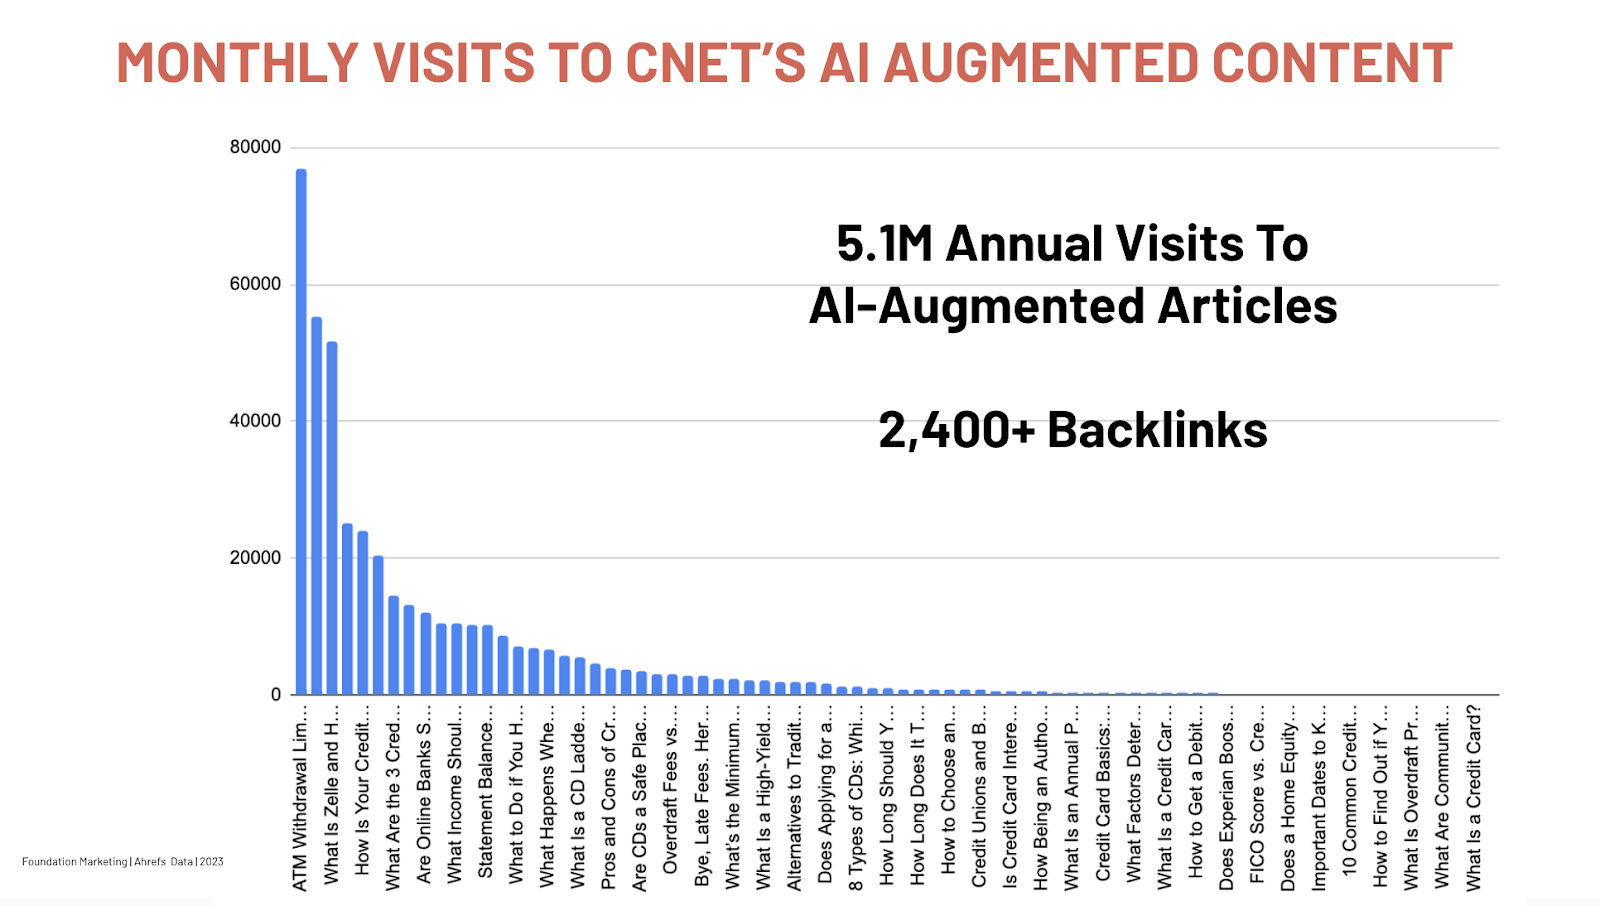 CNET is projected to drive 5.1M annual visits with AI-Augmented articles